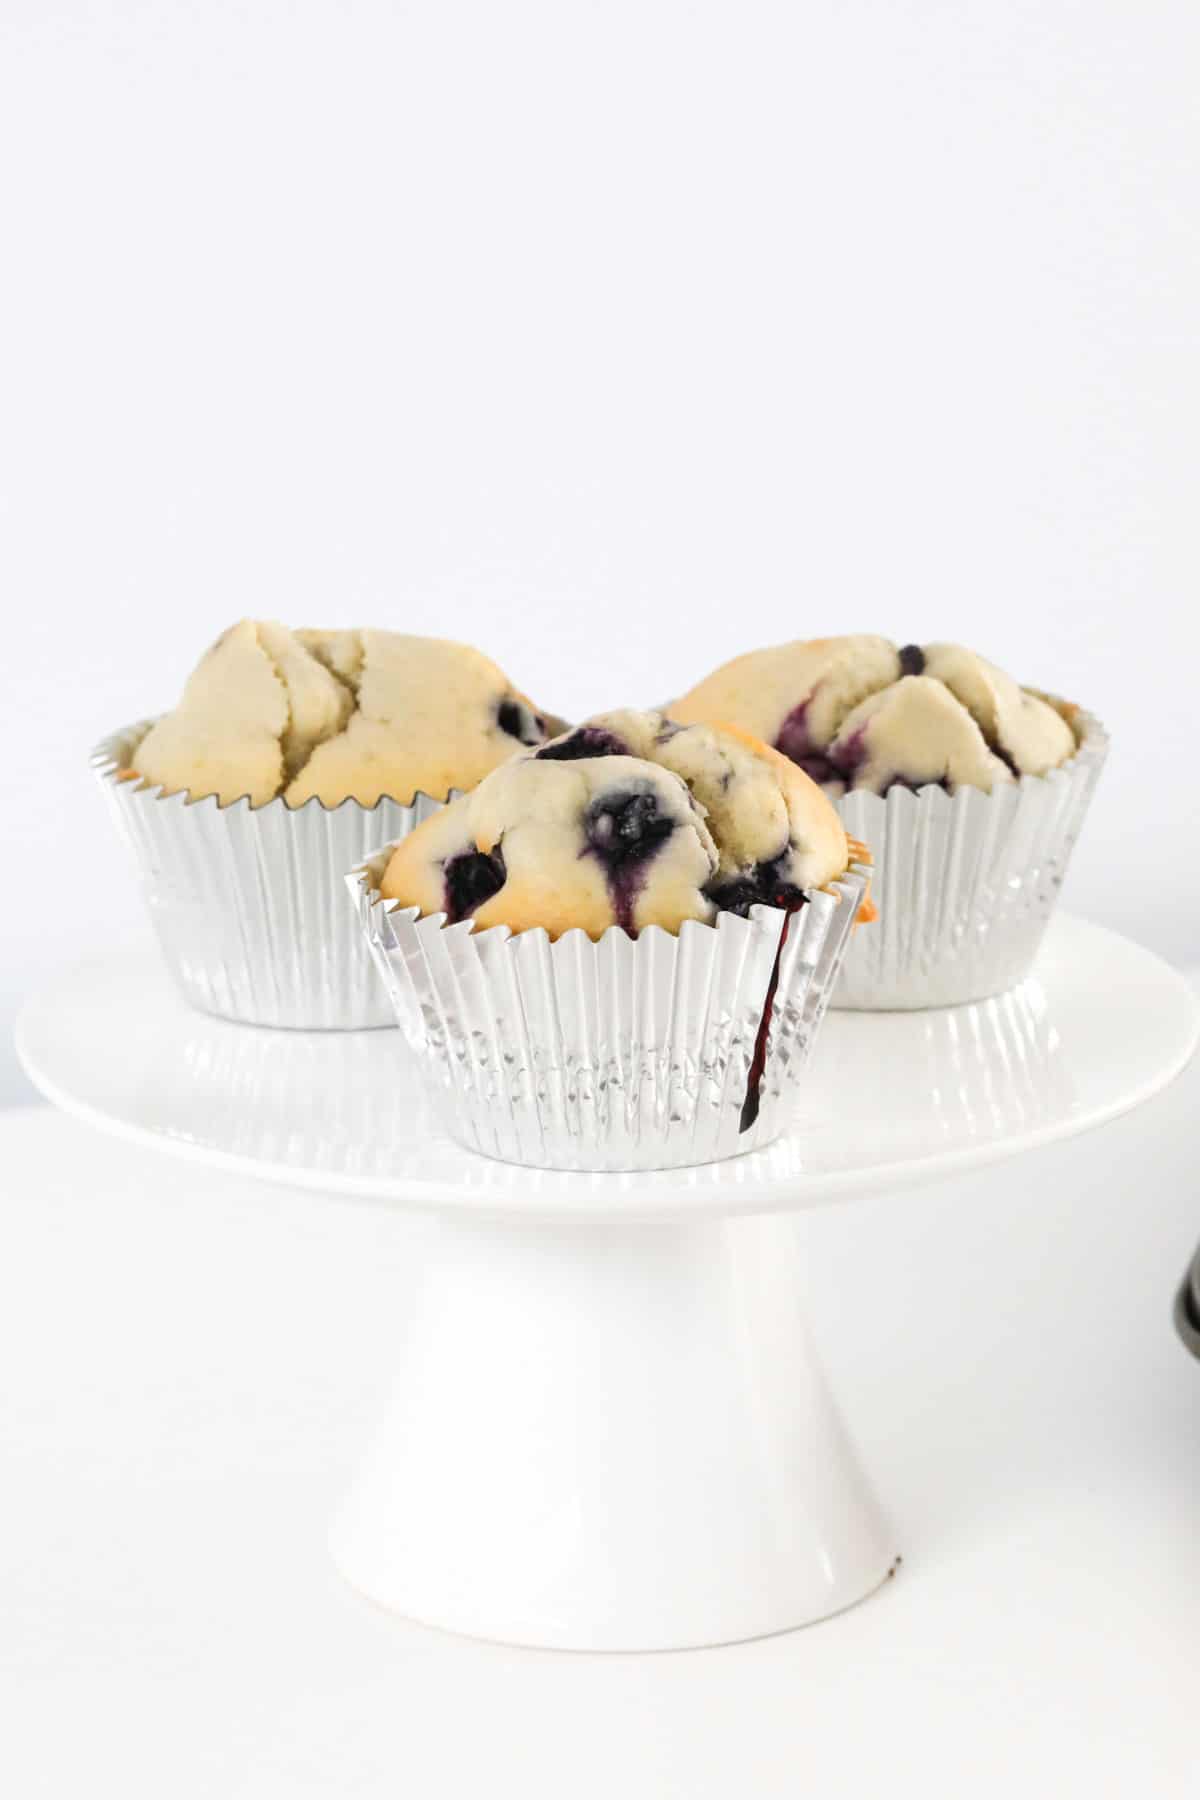 Three muffins with fruit on a cake stand.